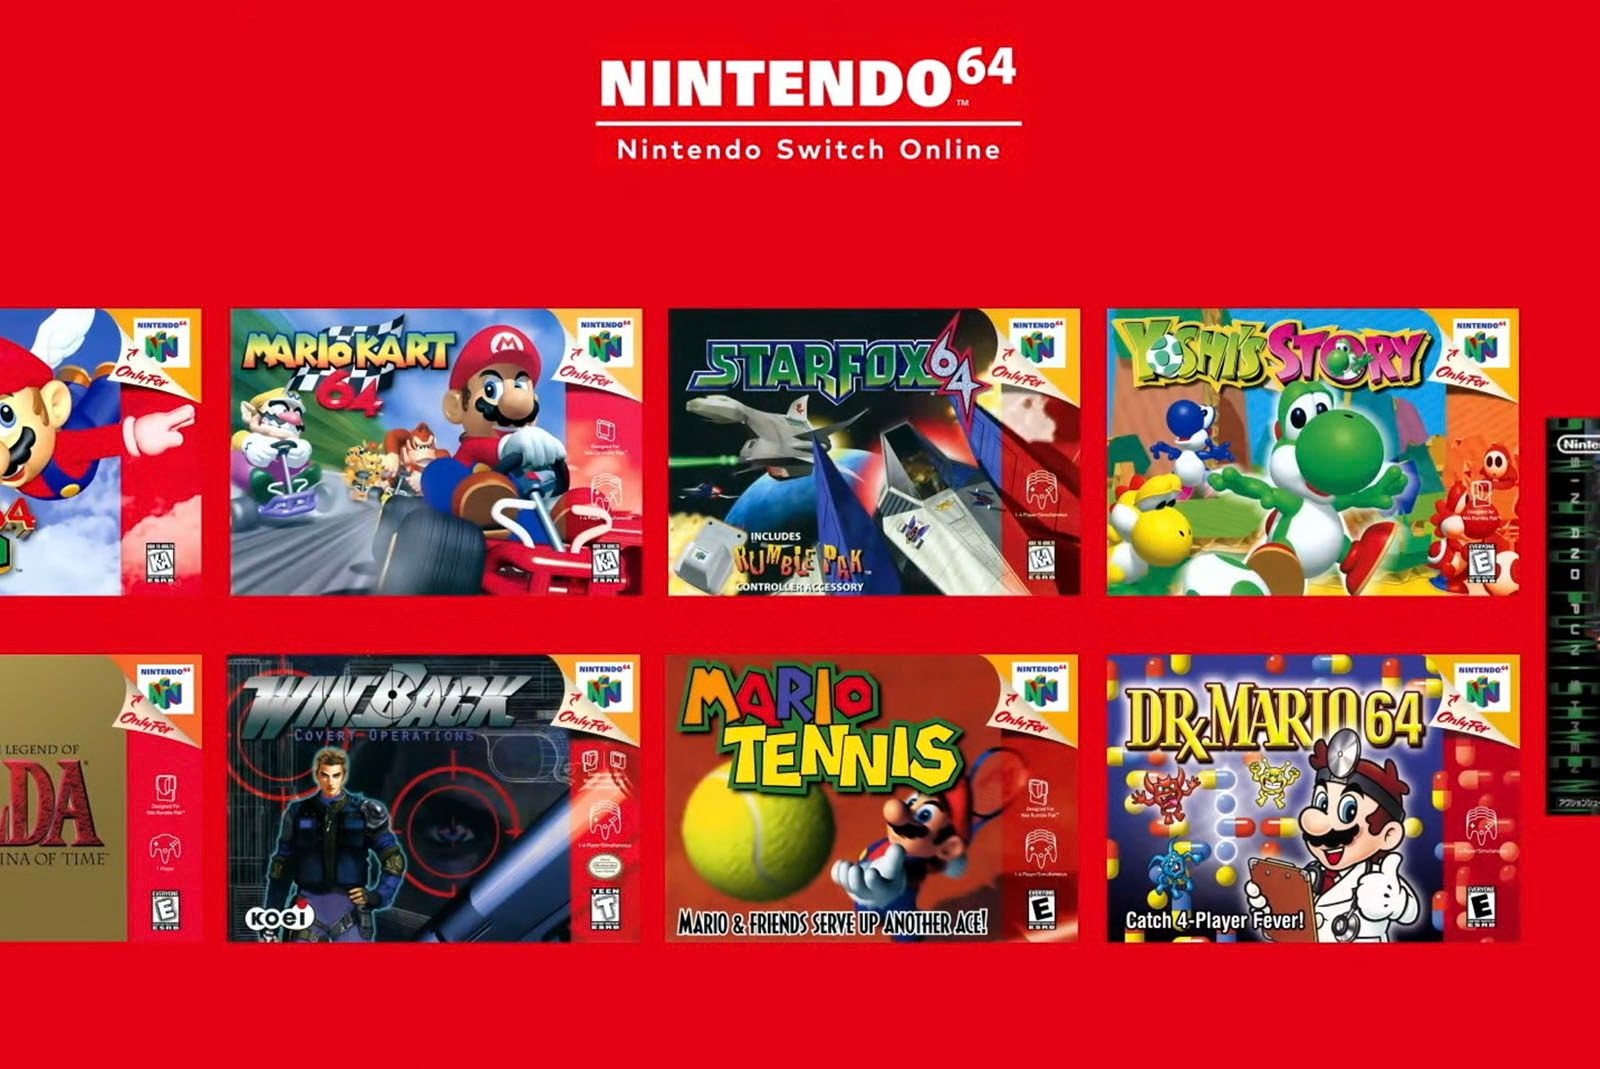 Nintendo 64 classics and SEGA Genesis games coming soon to Switch Online photo 1